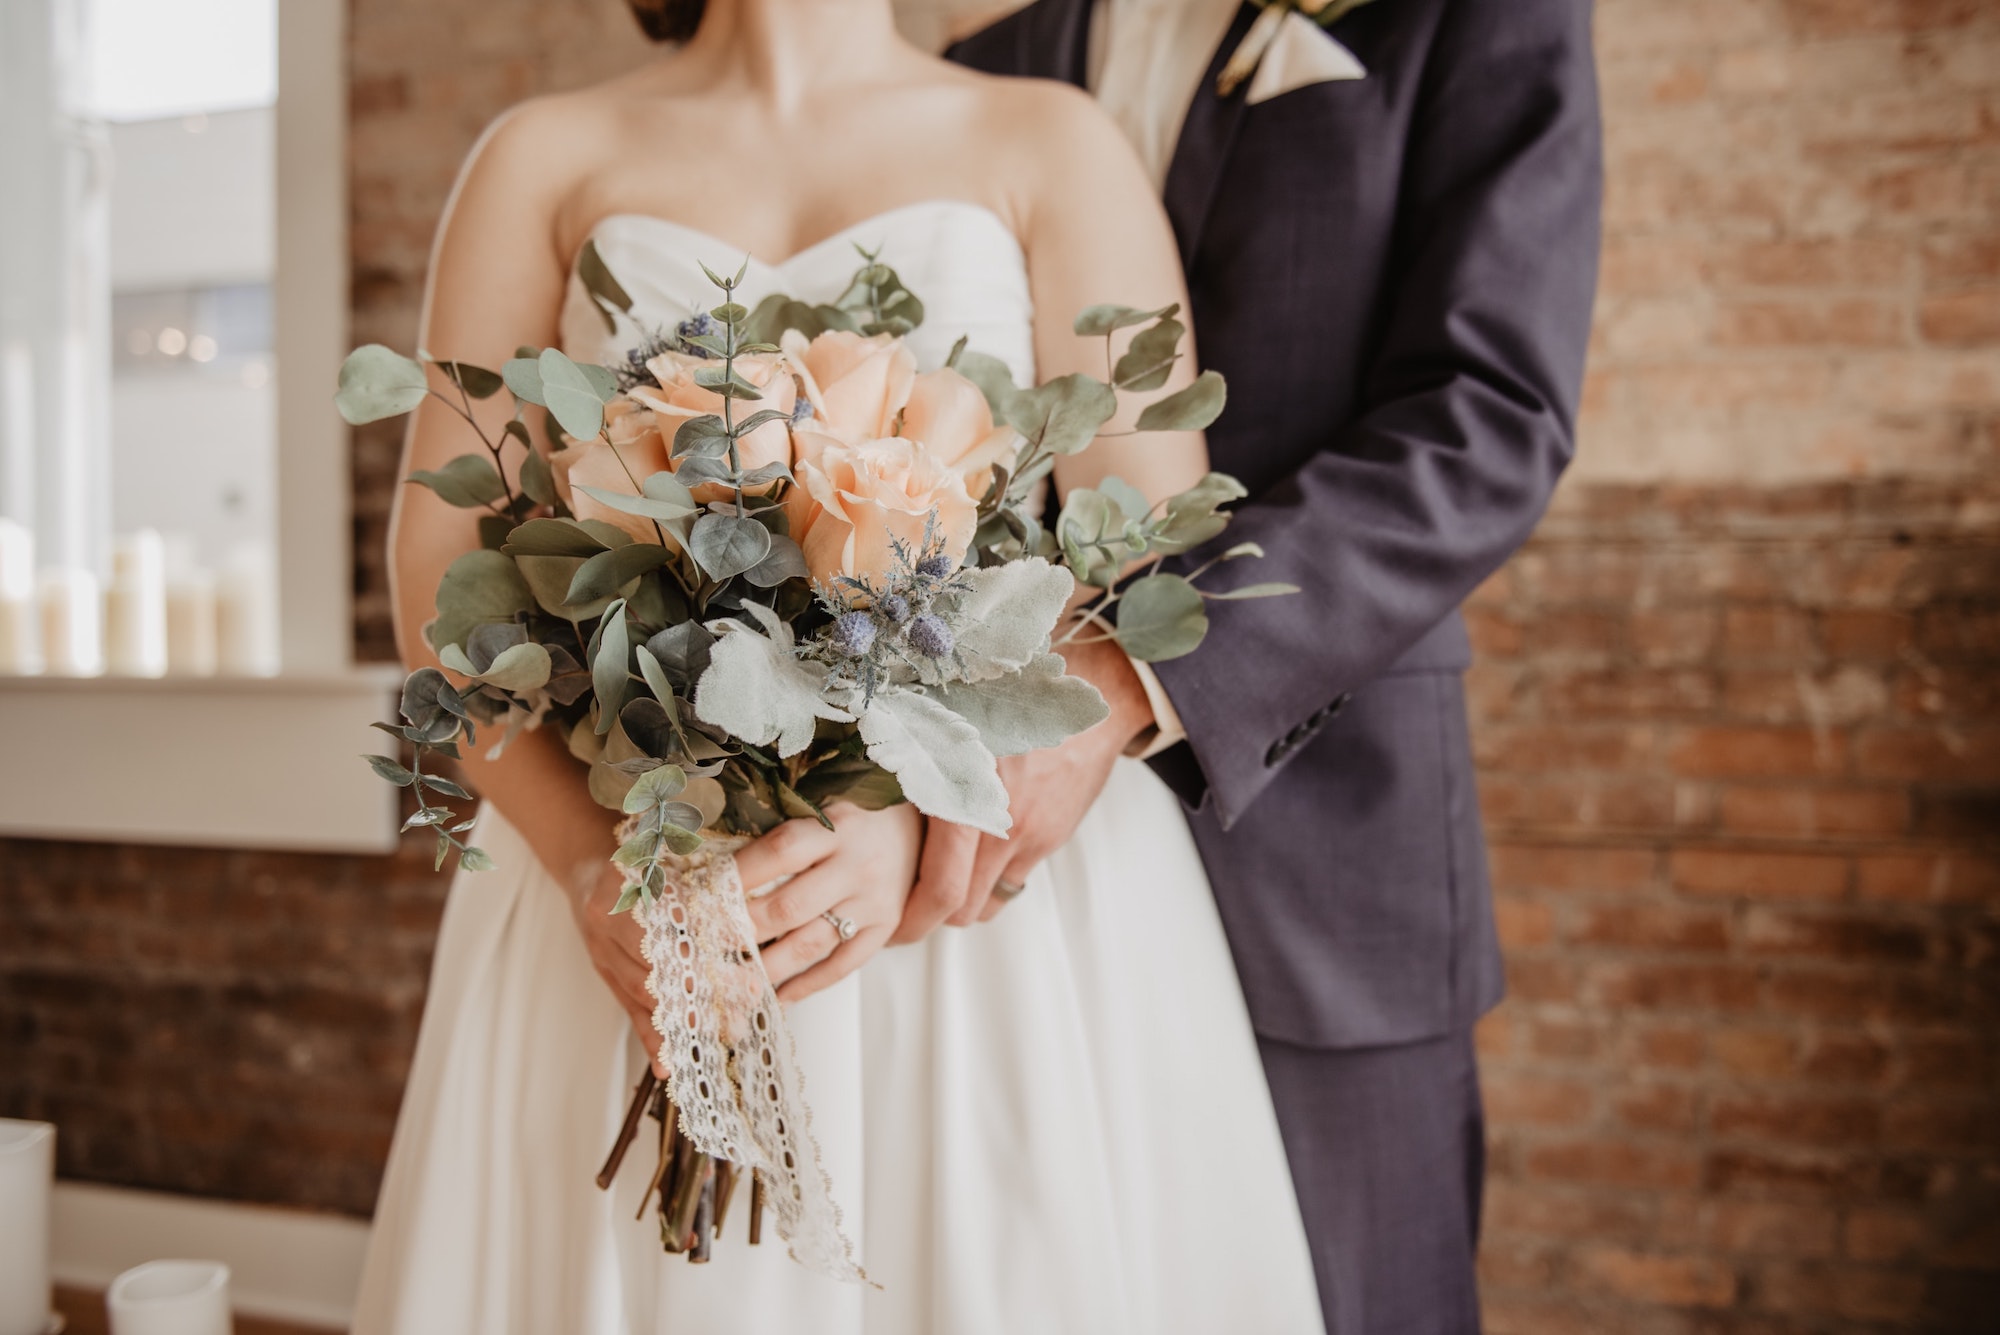 Photo of an embracing couple holding a bouquet of flowers.